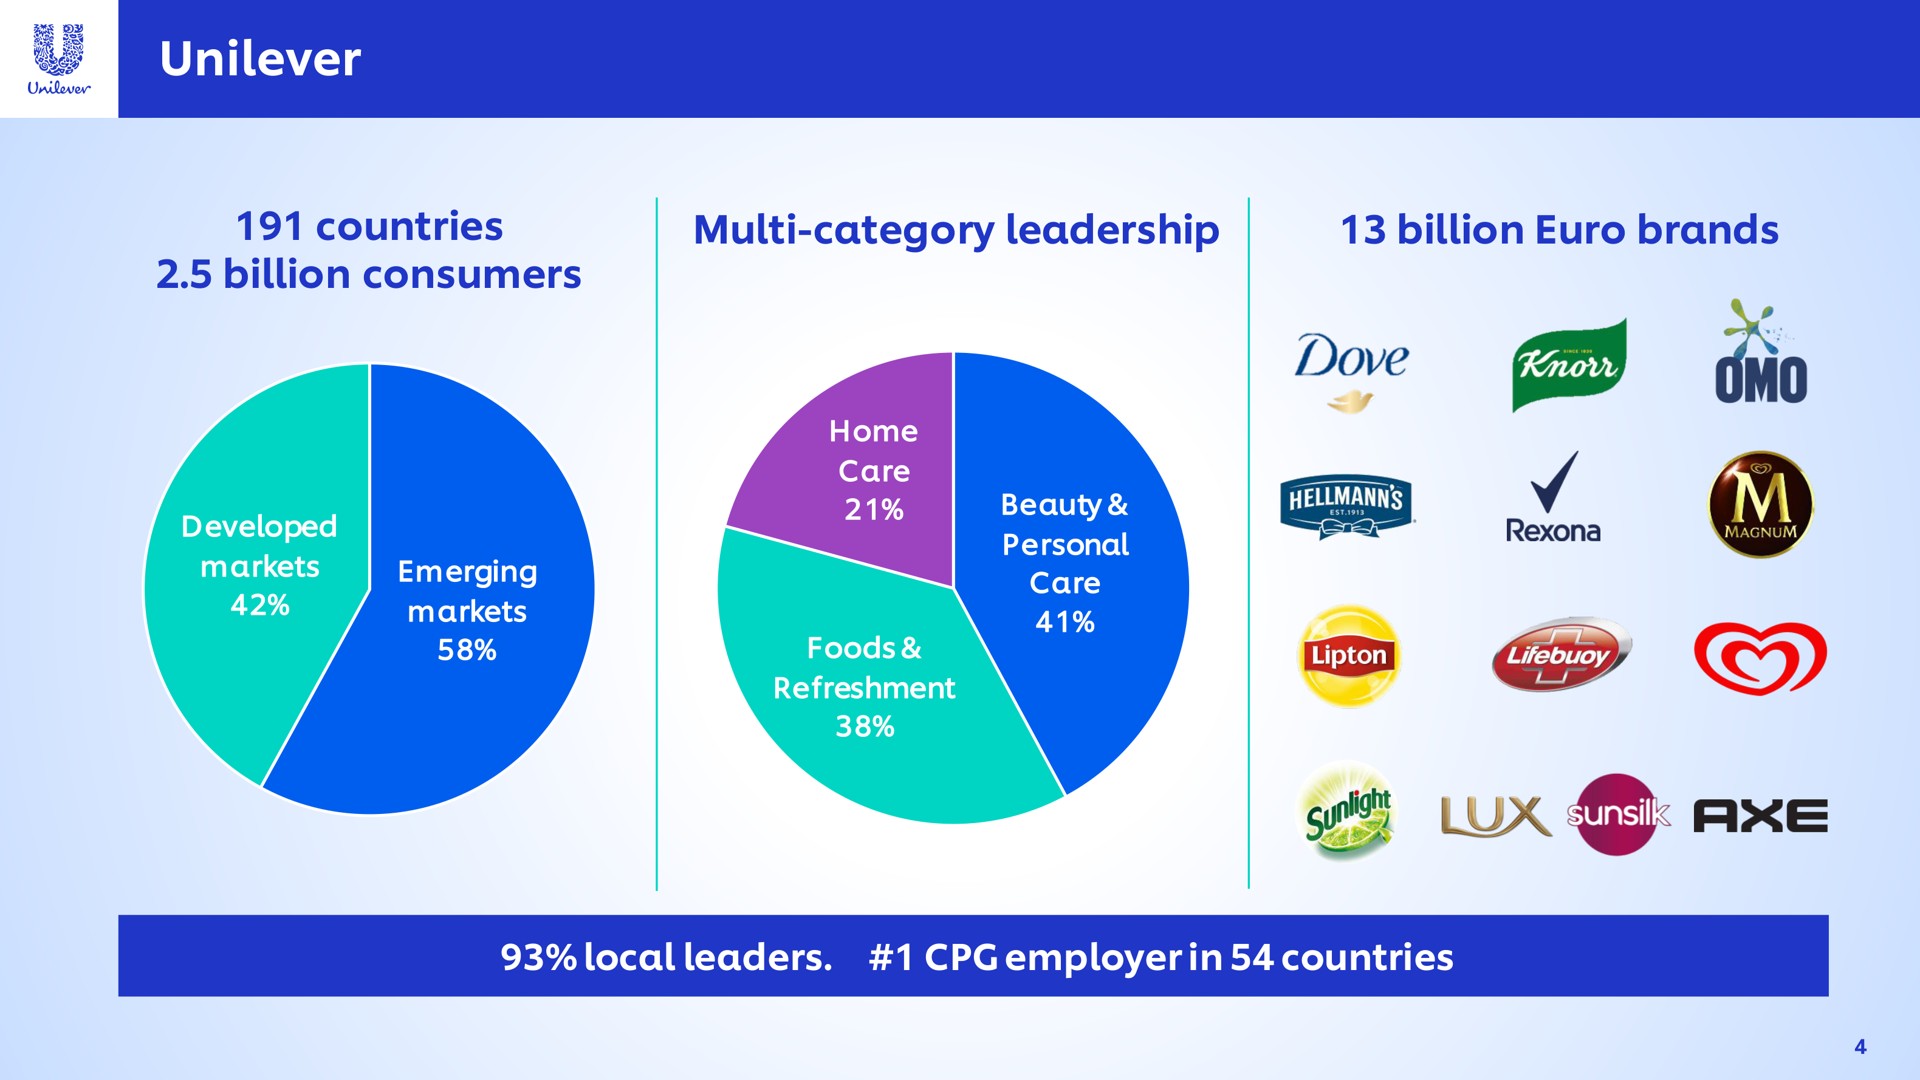 category leadership dove thio lux axe in countries | Unilever